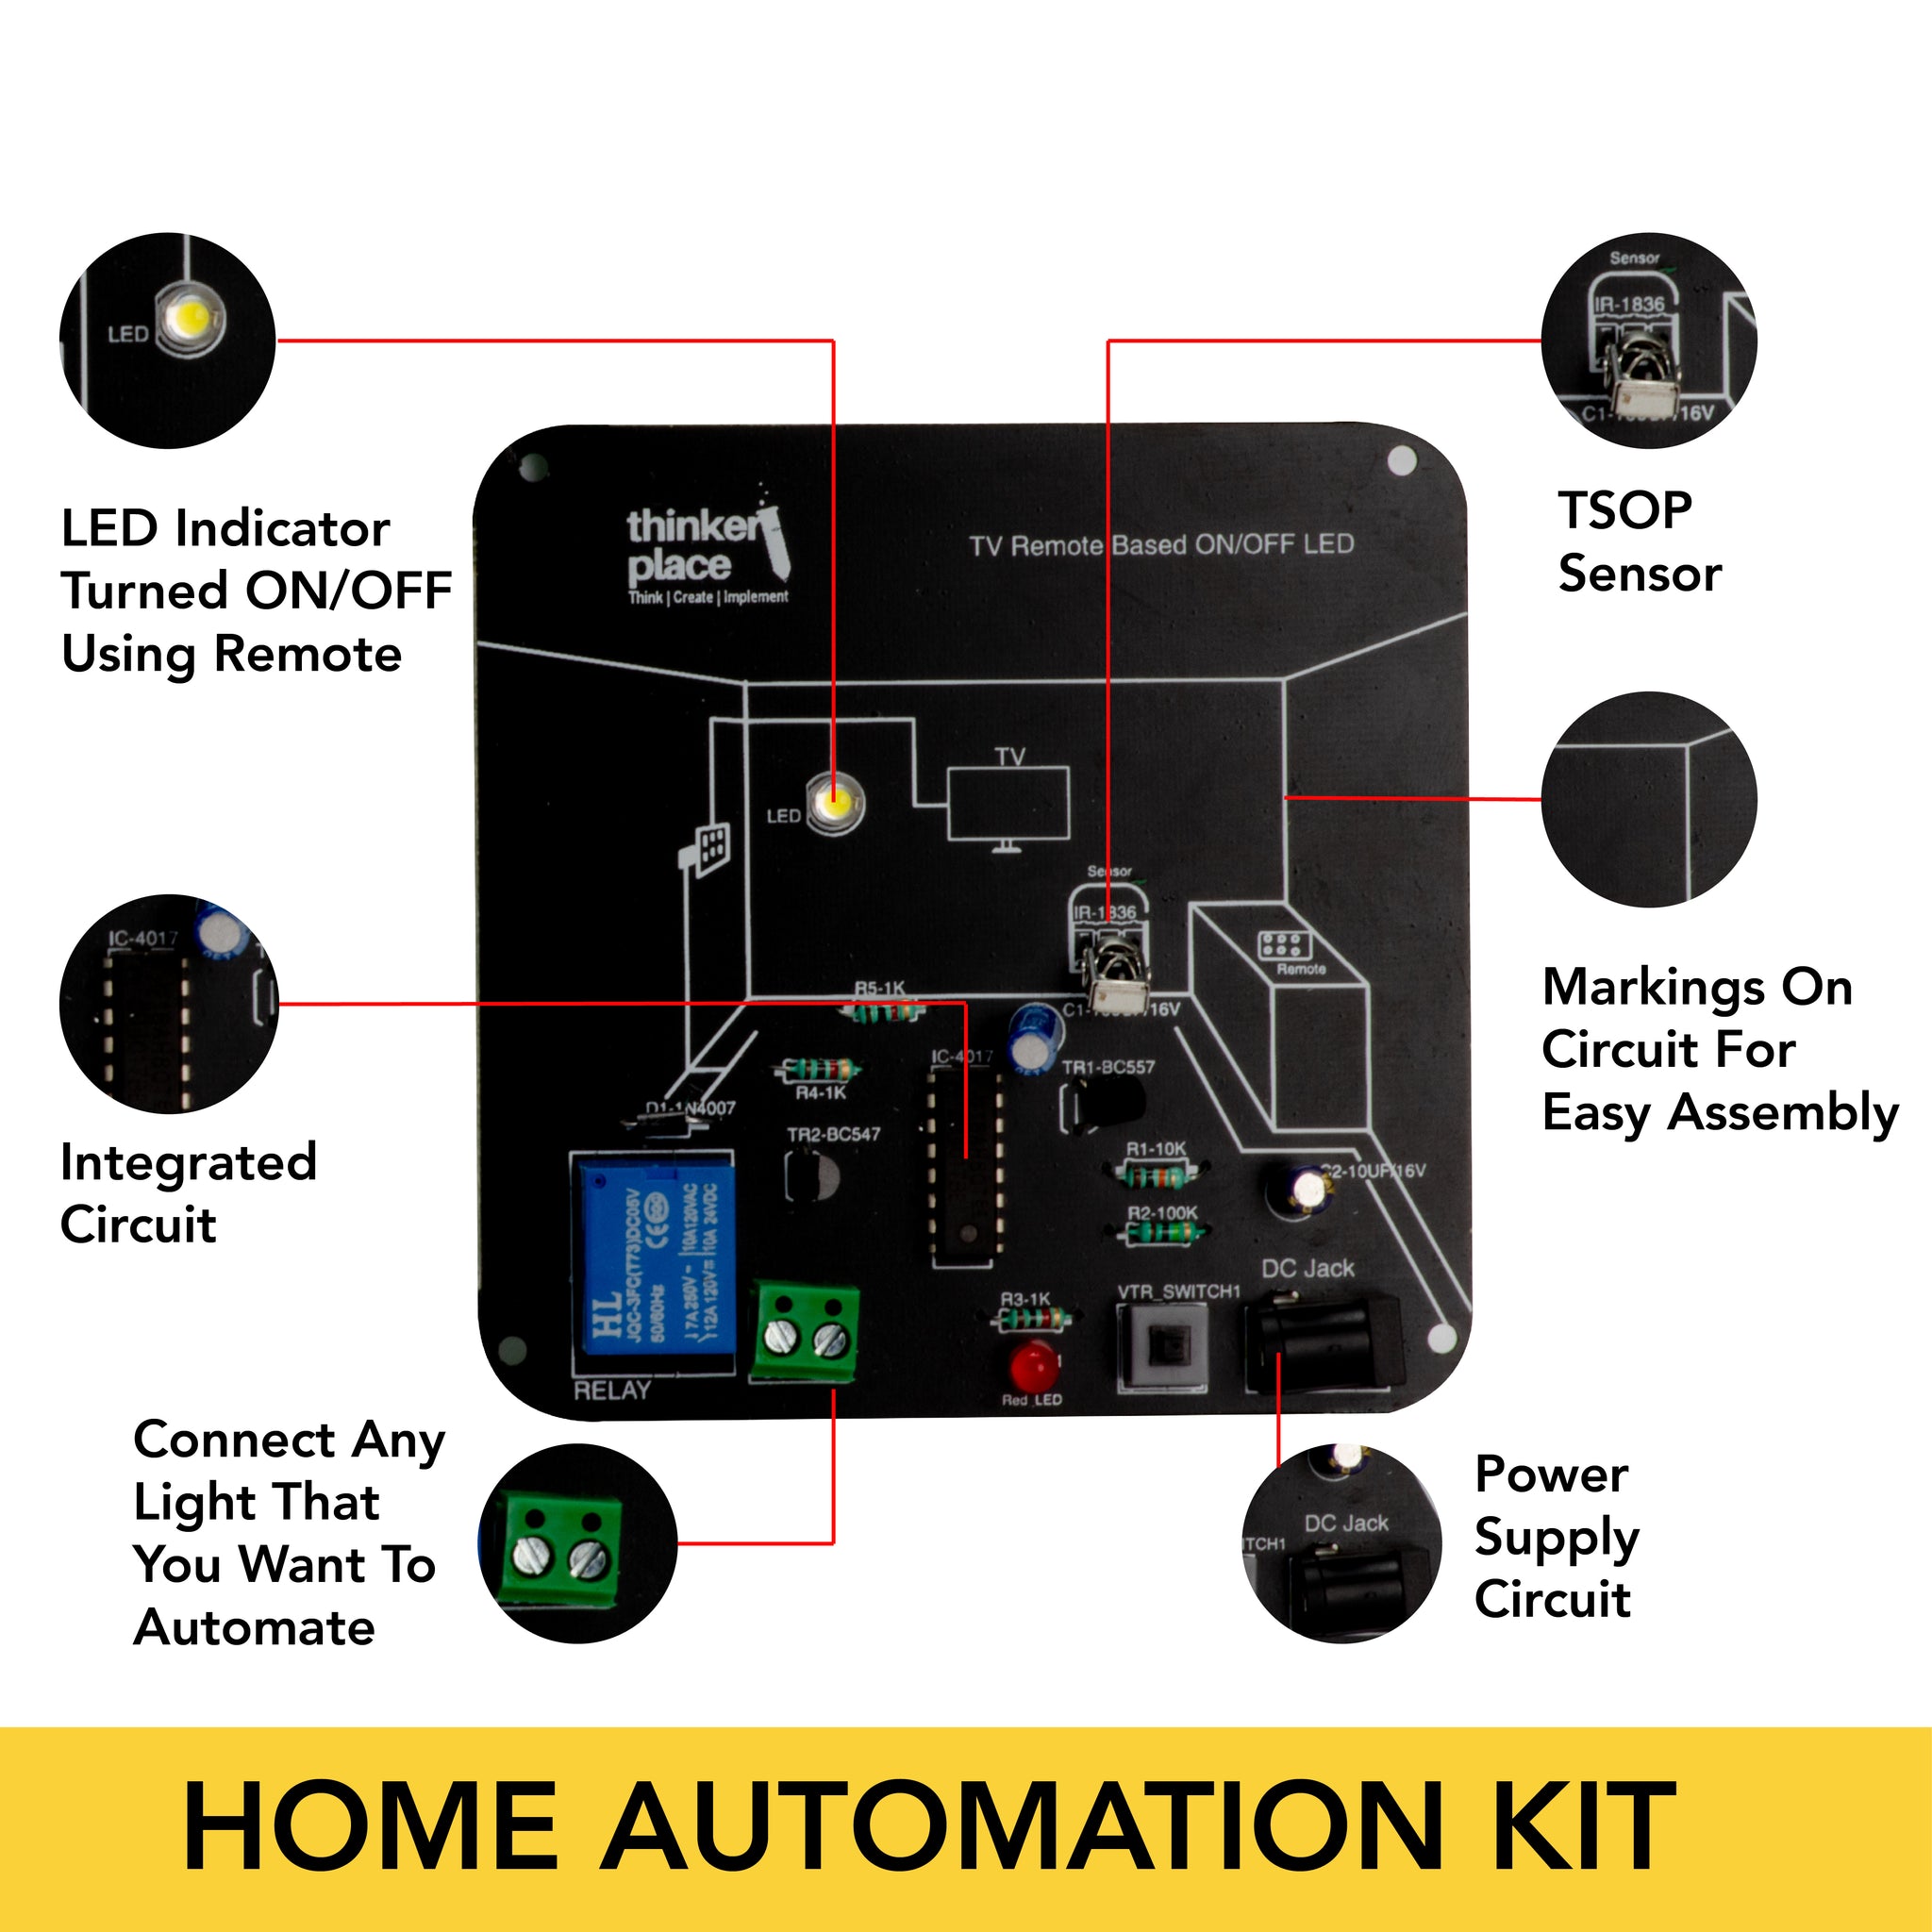 DIY Home Automation & Security, Ultimate Control Kit